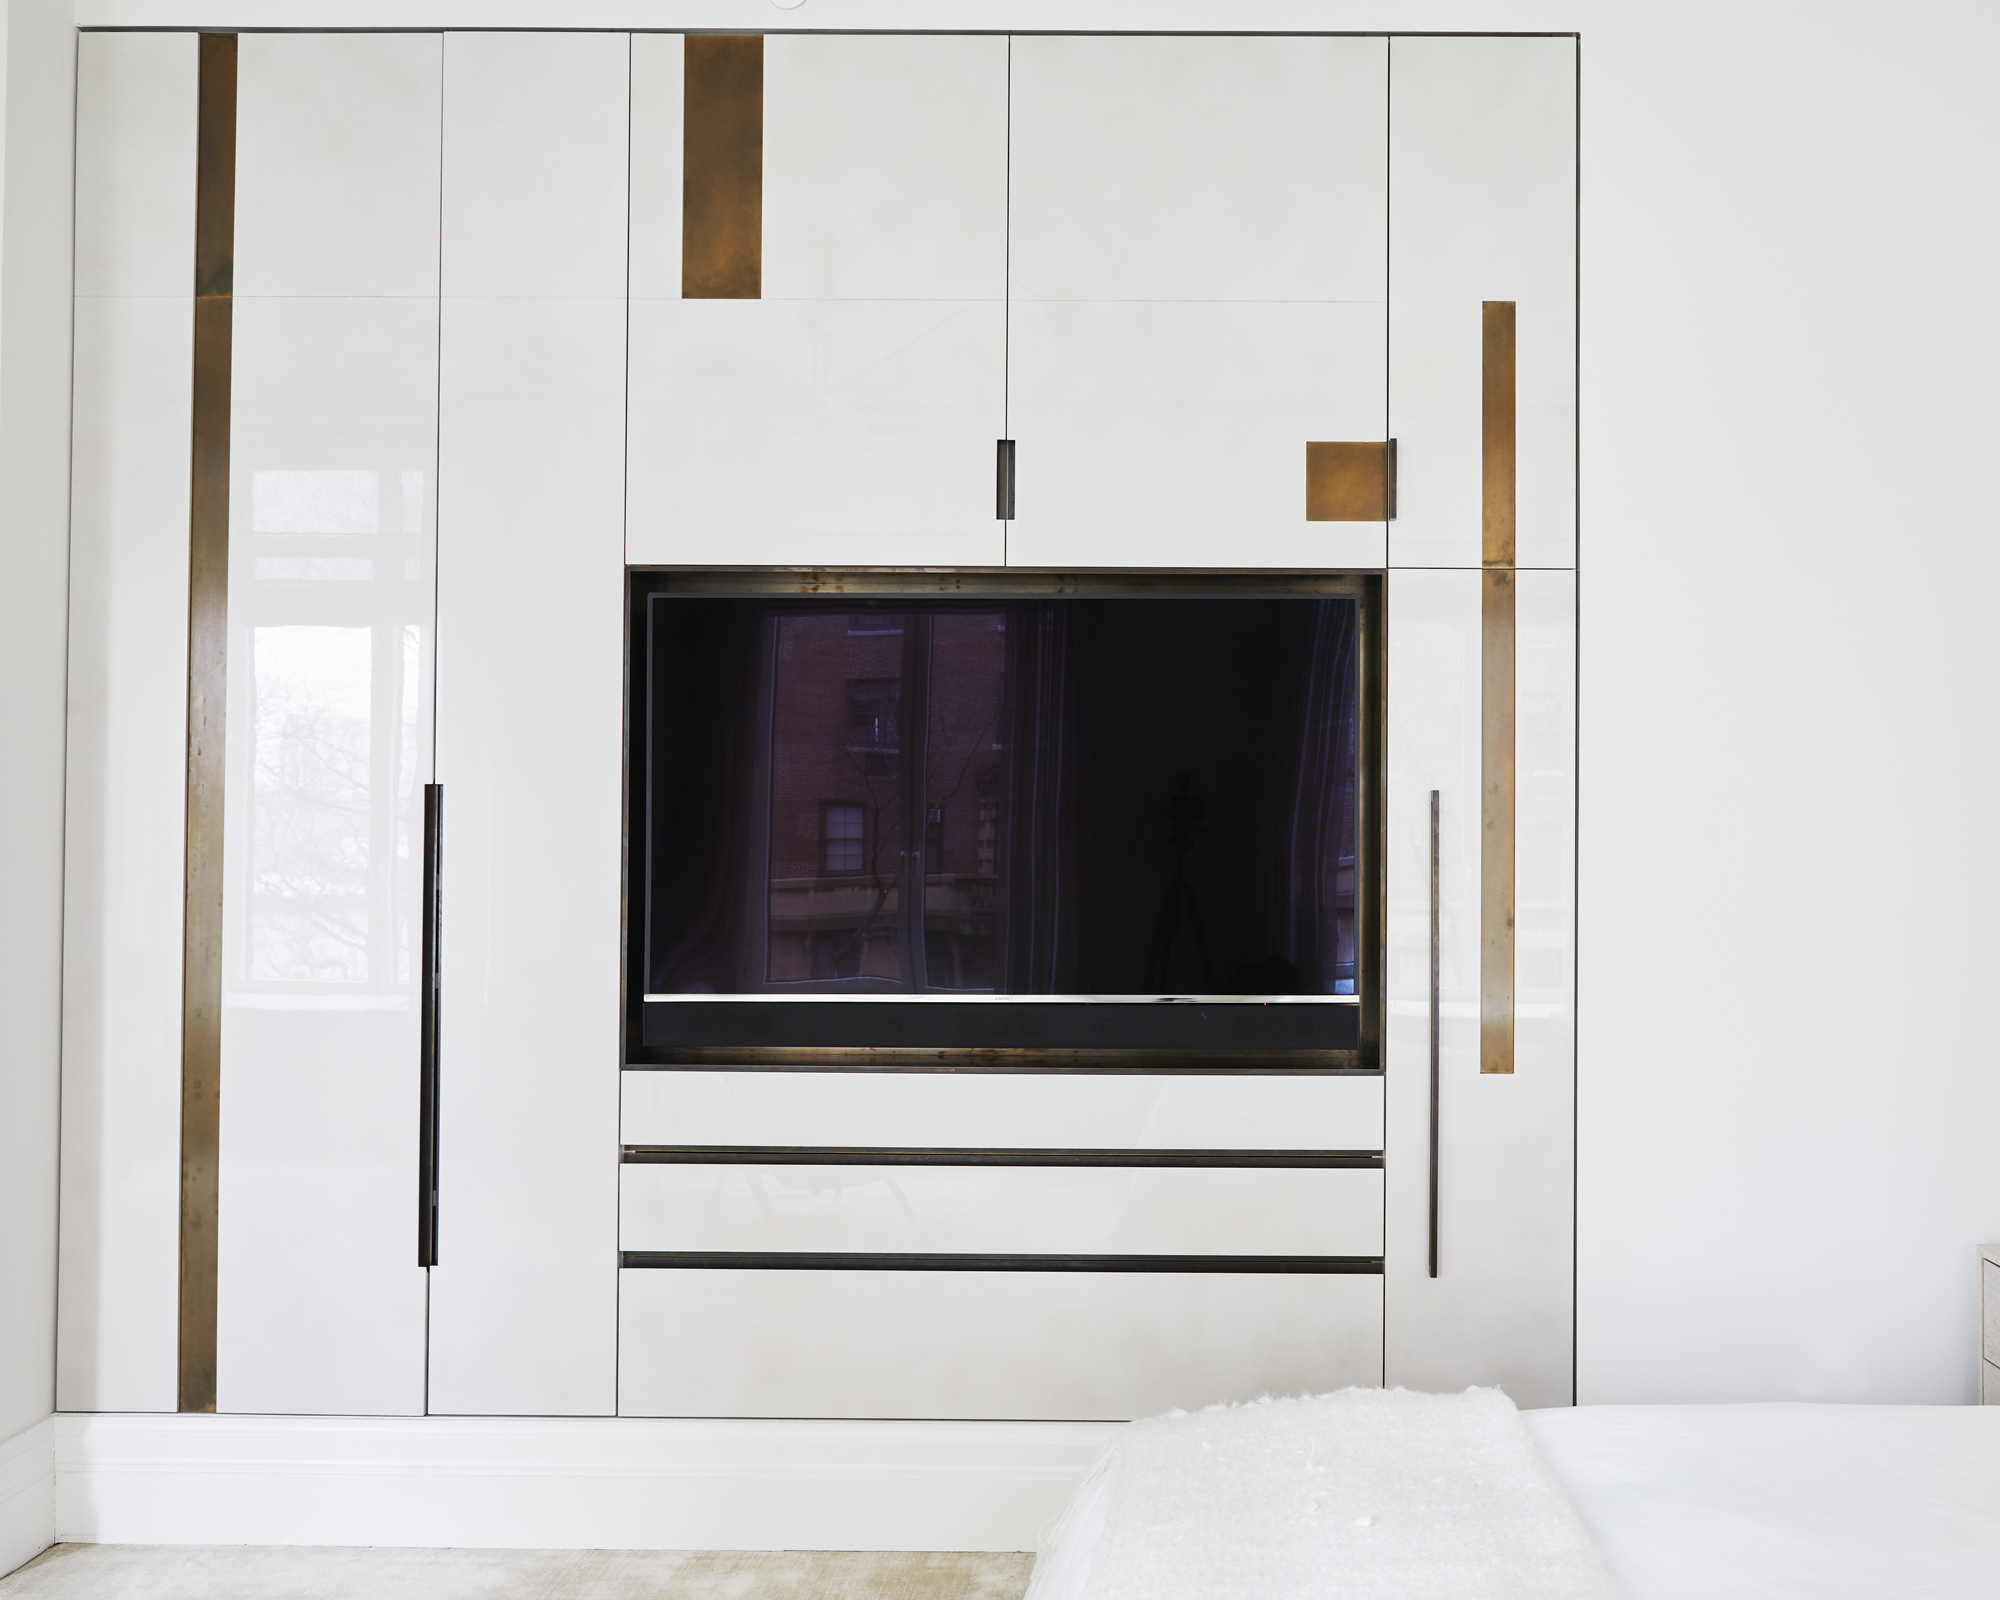 An example of simple bedroom ideas with white built-in wardrobe in a bedroom with a TV shelf